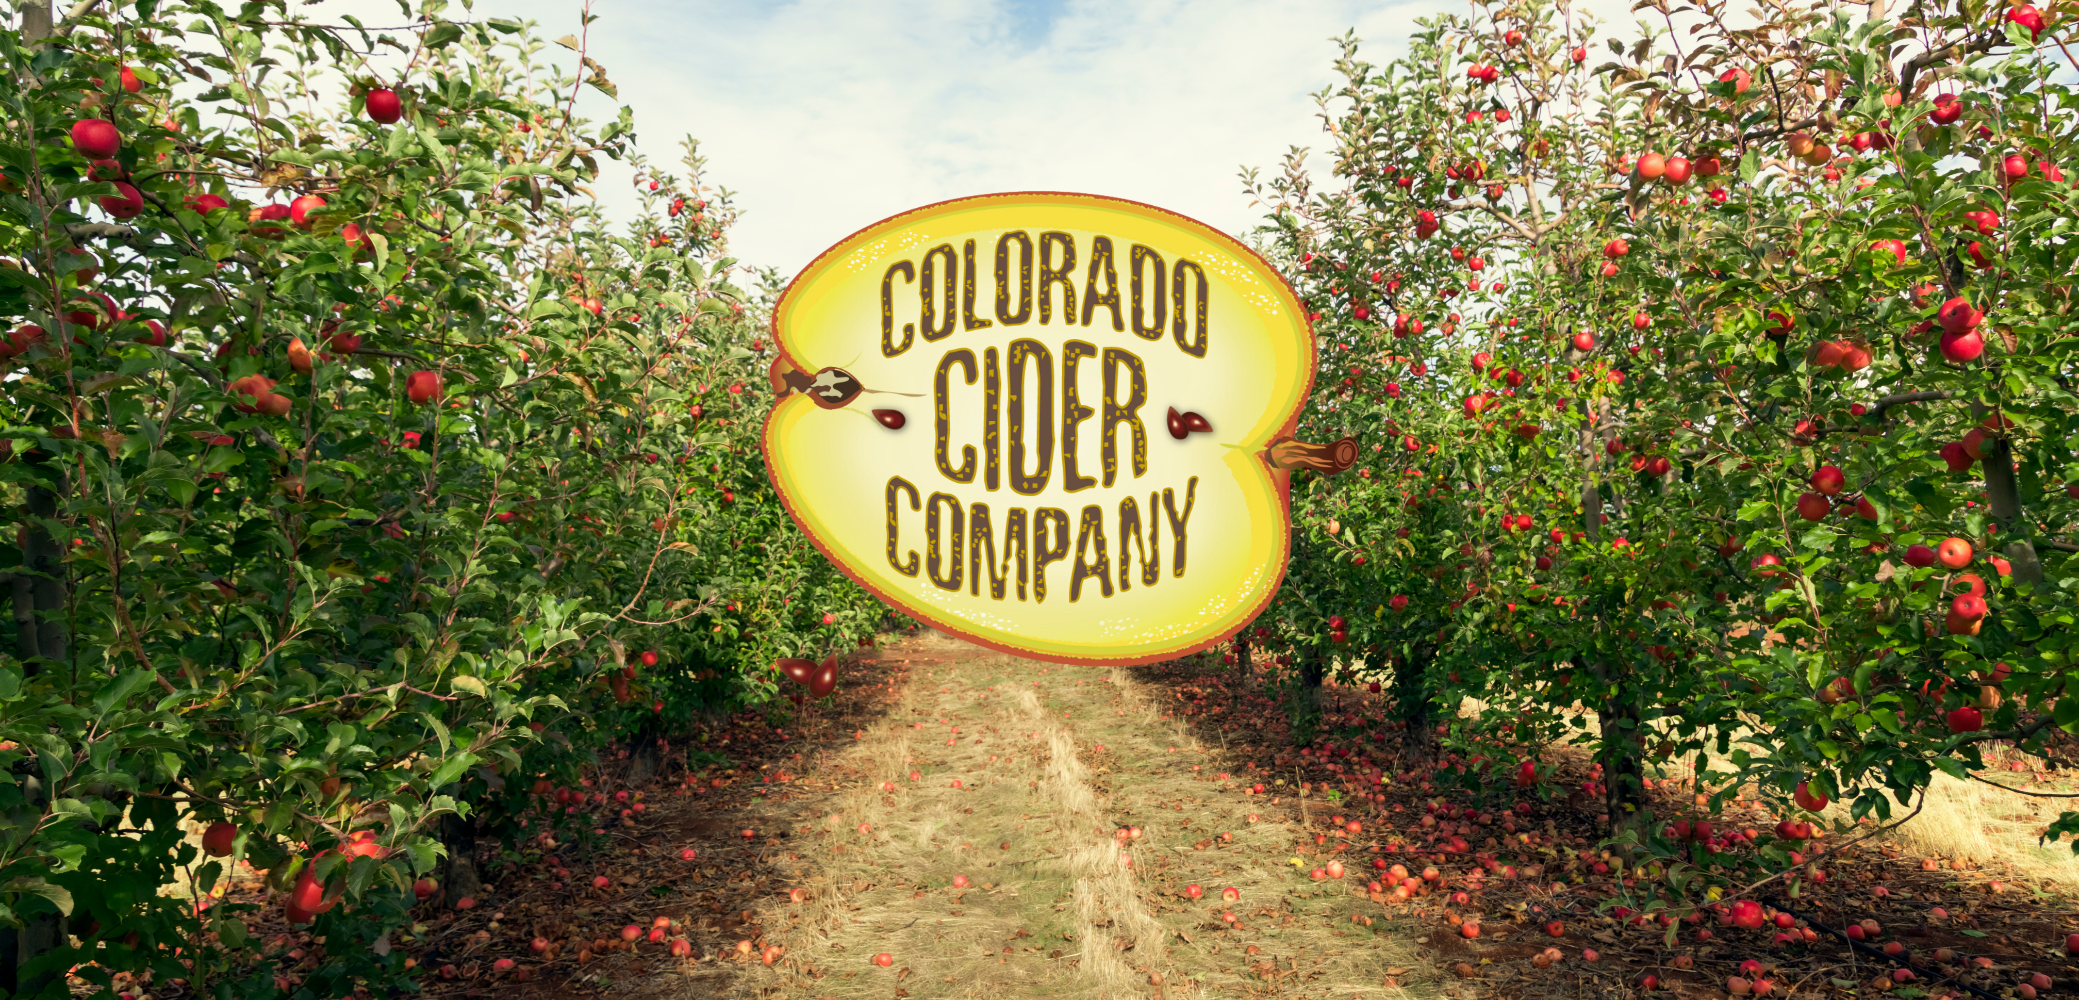 Colorado Cider Company - QTS Fermenters & Brites up to 20 BBL, Wild Goose Canning, SKA Depal, Lanxess Velcorin Doser, Pall Filter, Chiller, More